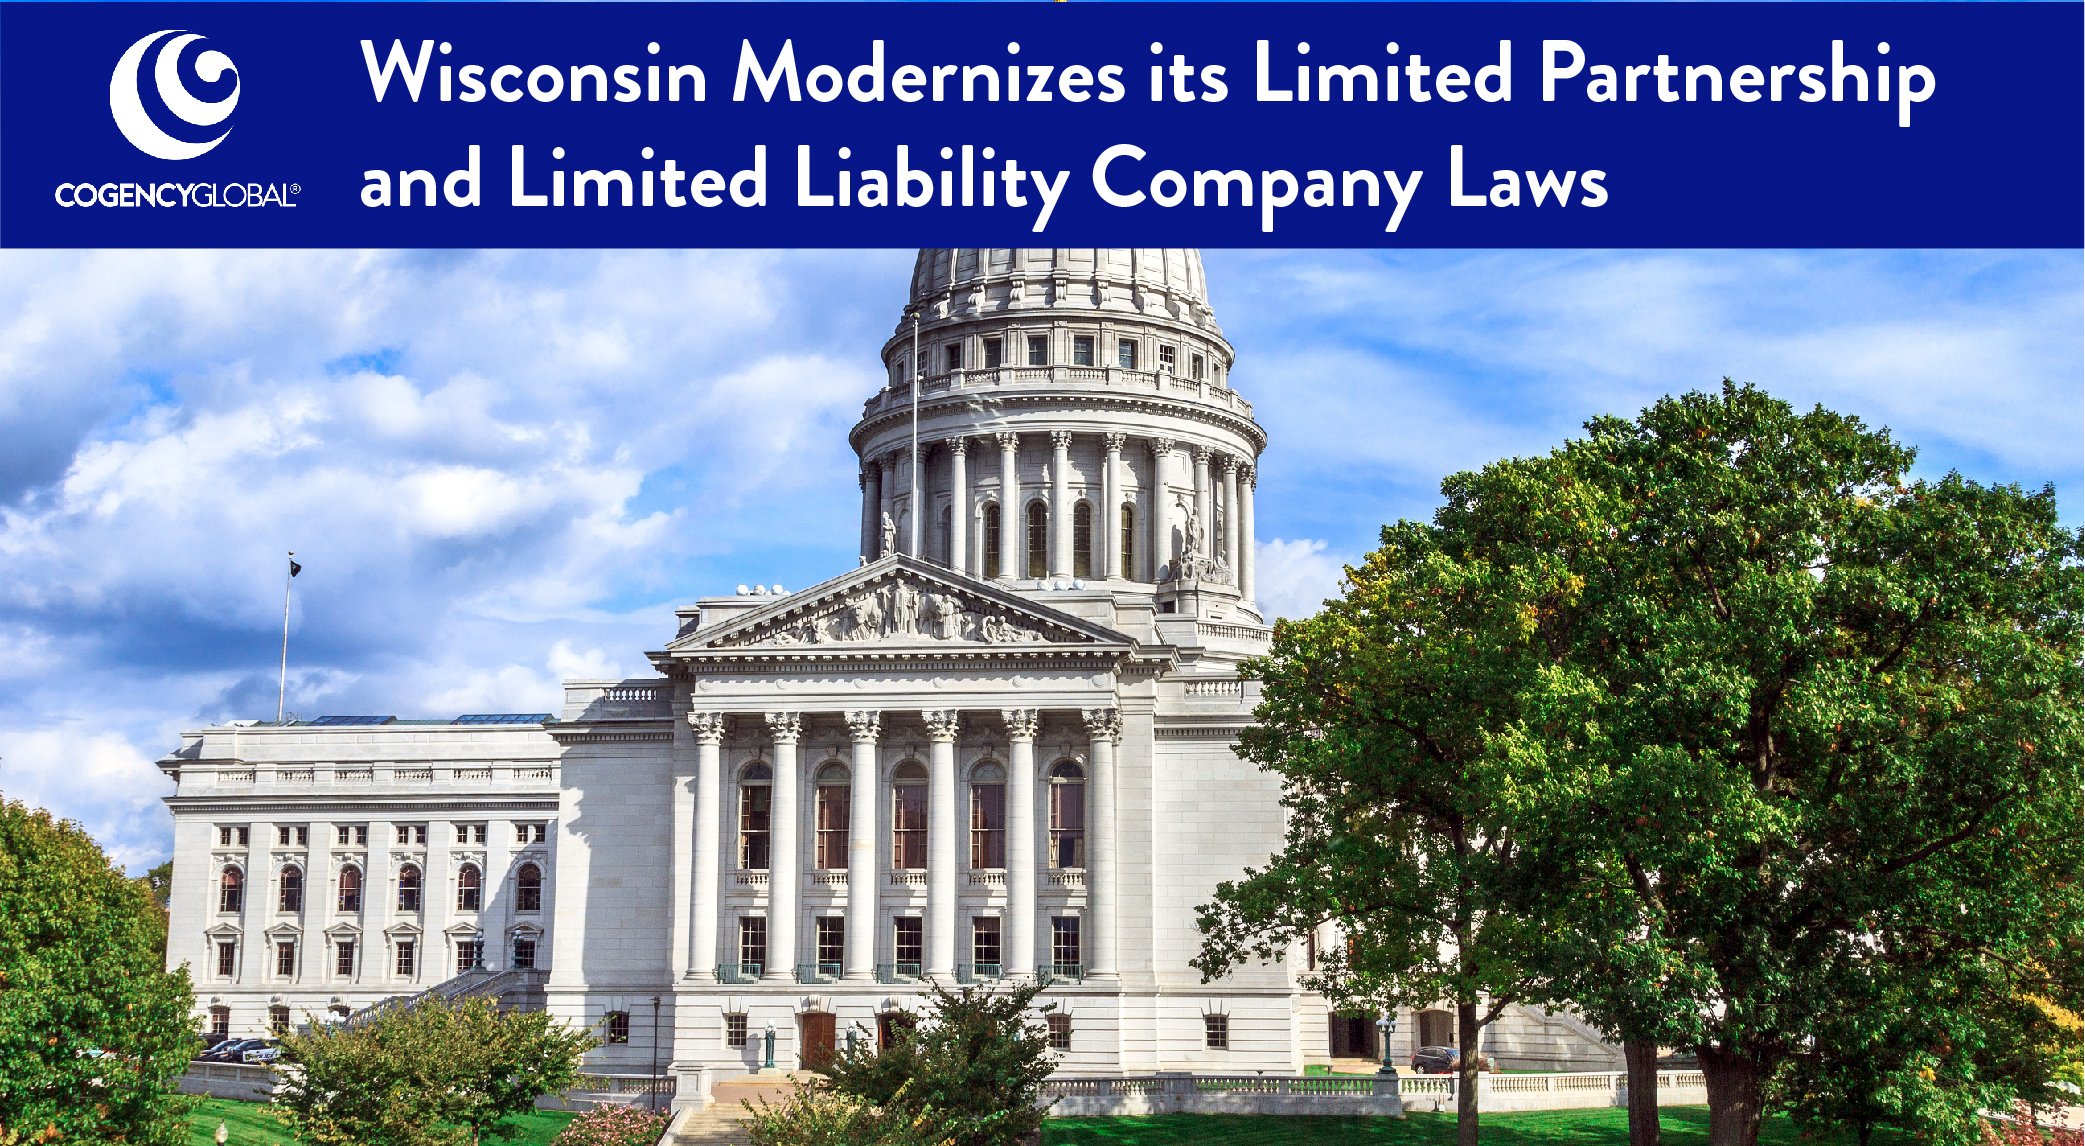 Wisconsin Modernizes its Limited Partnership and Limited Liability Company Laws